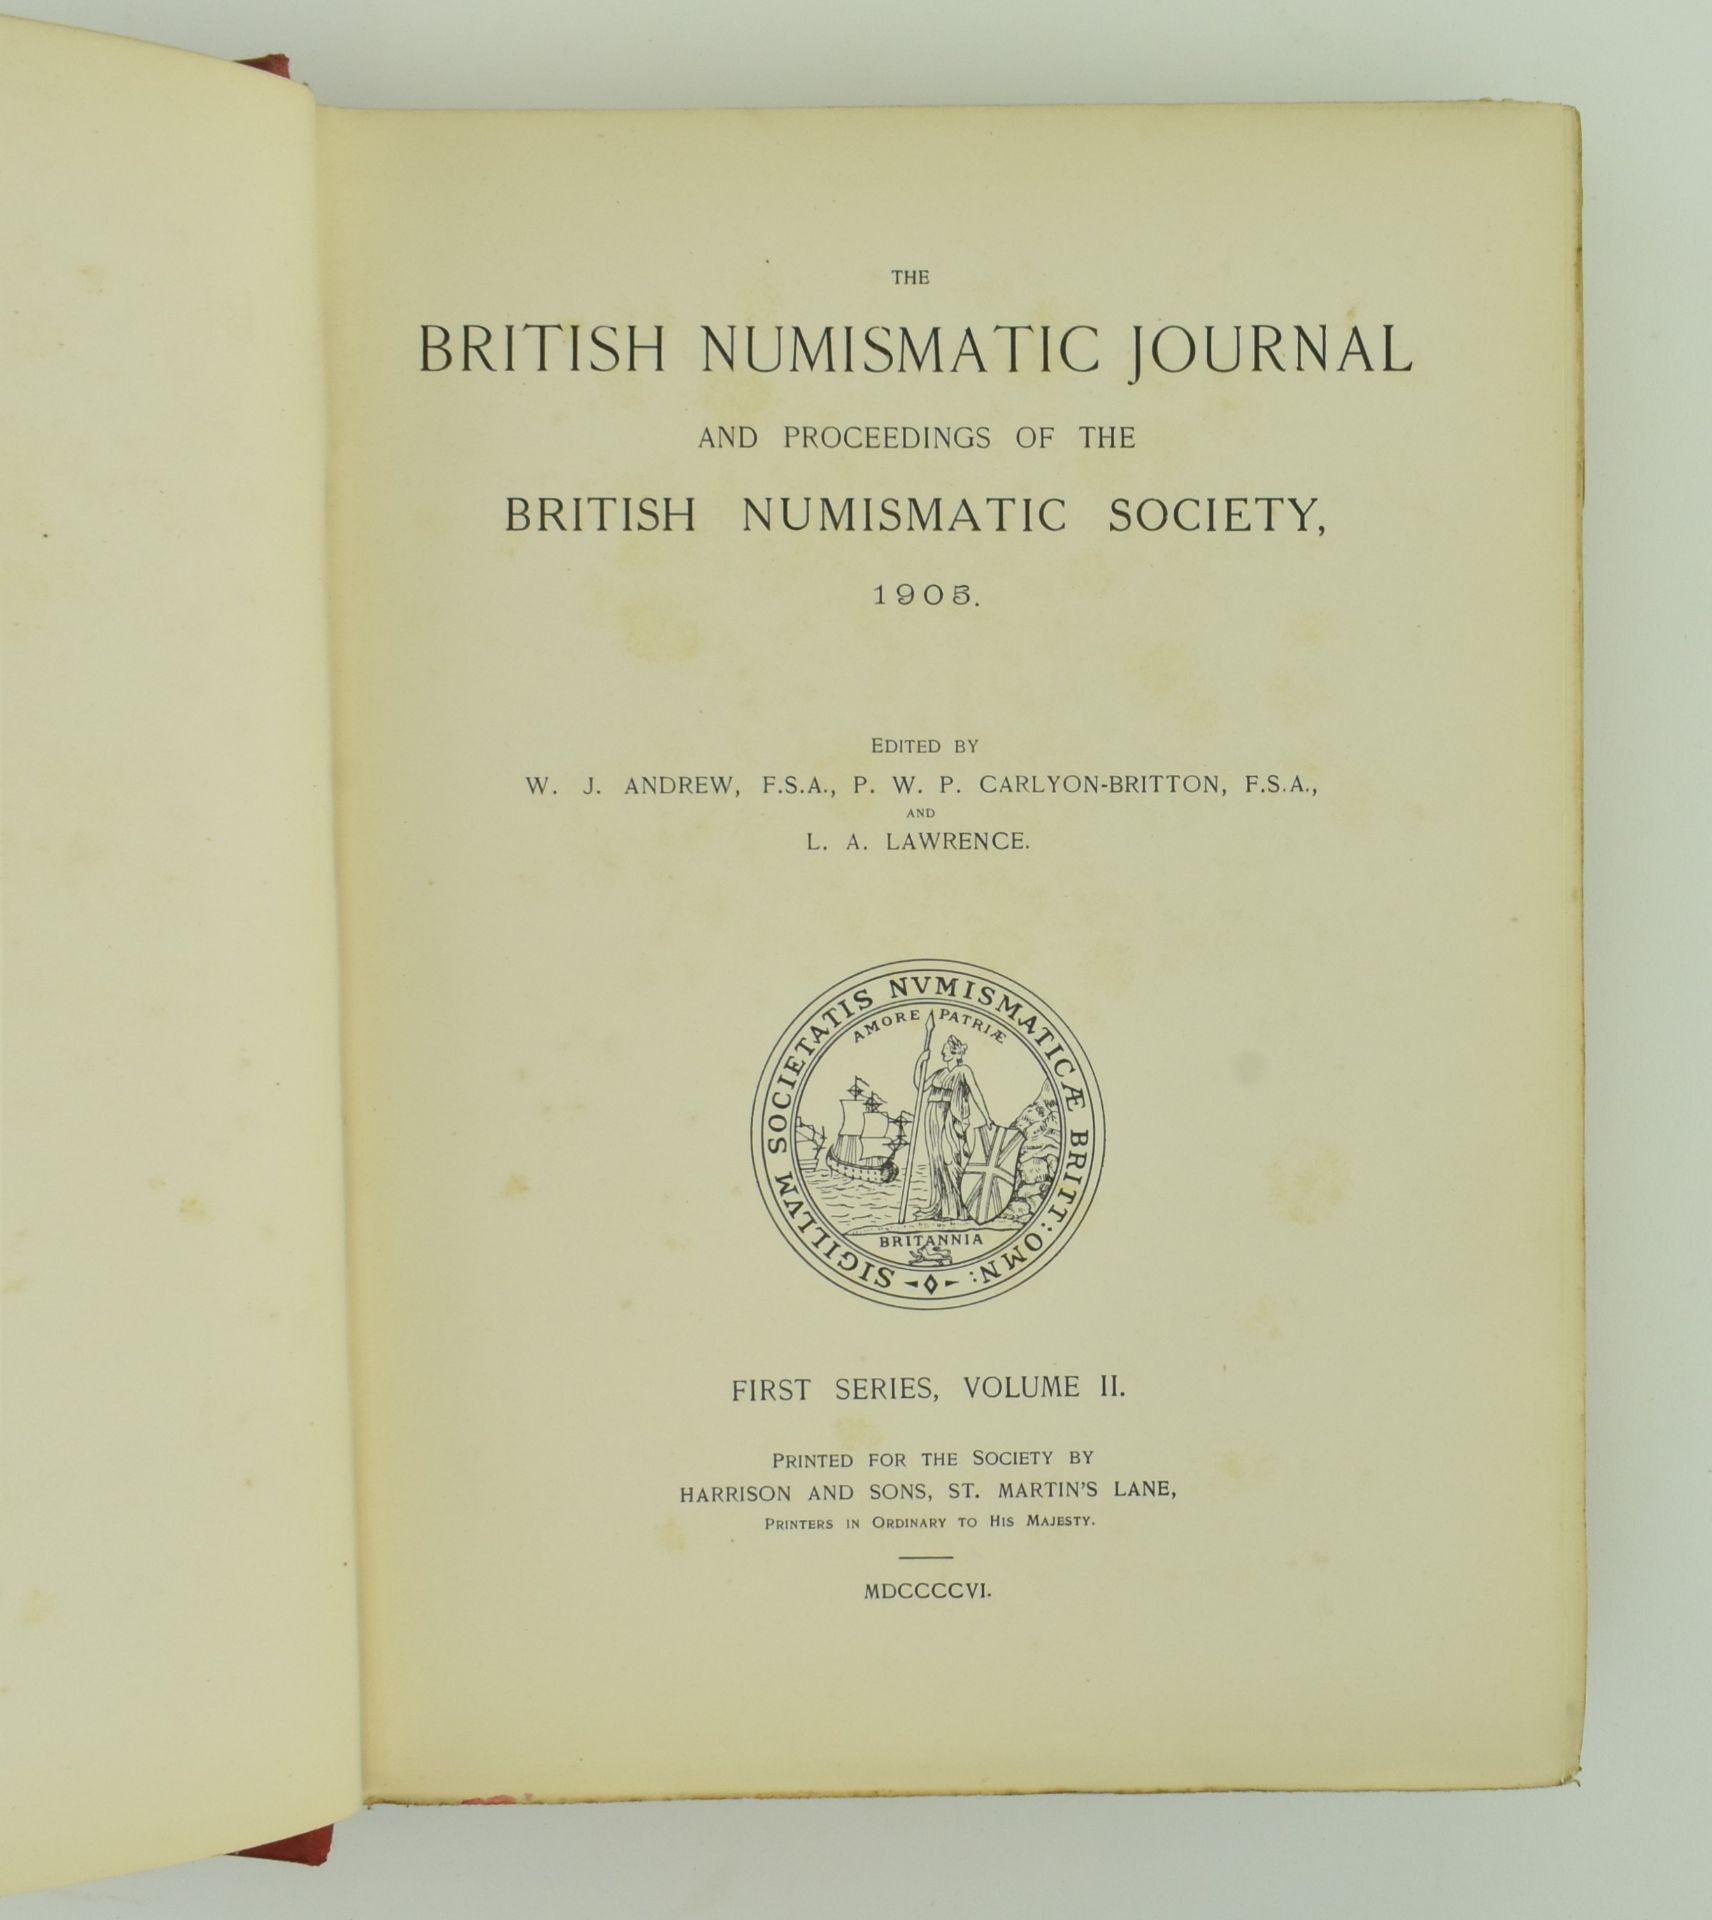 1905 THE BRITISH NUMISMATIC JOURNAL FIRST SERIES VOL I & II - Image 6 of 8